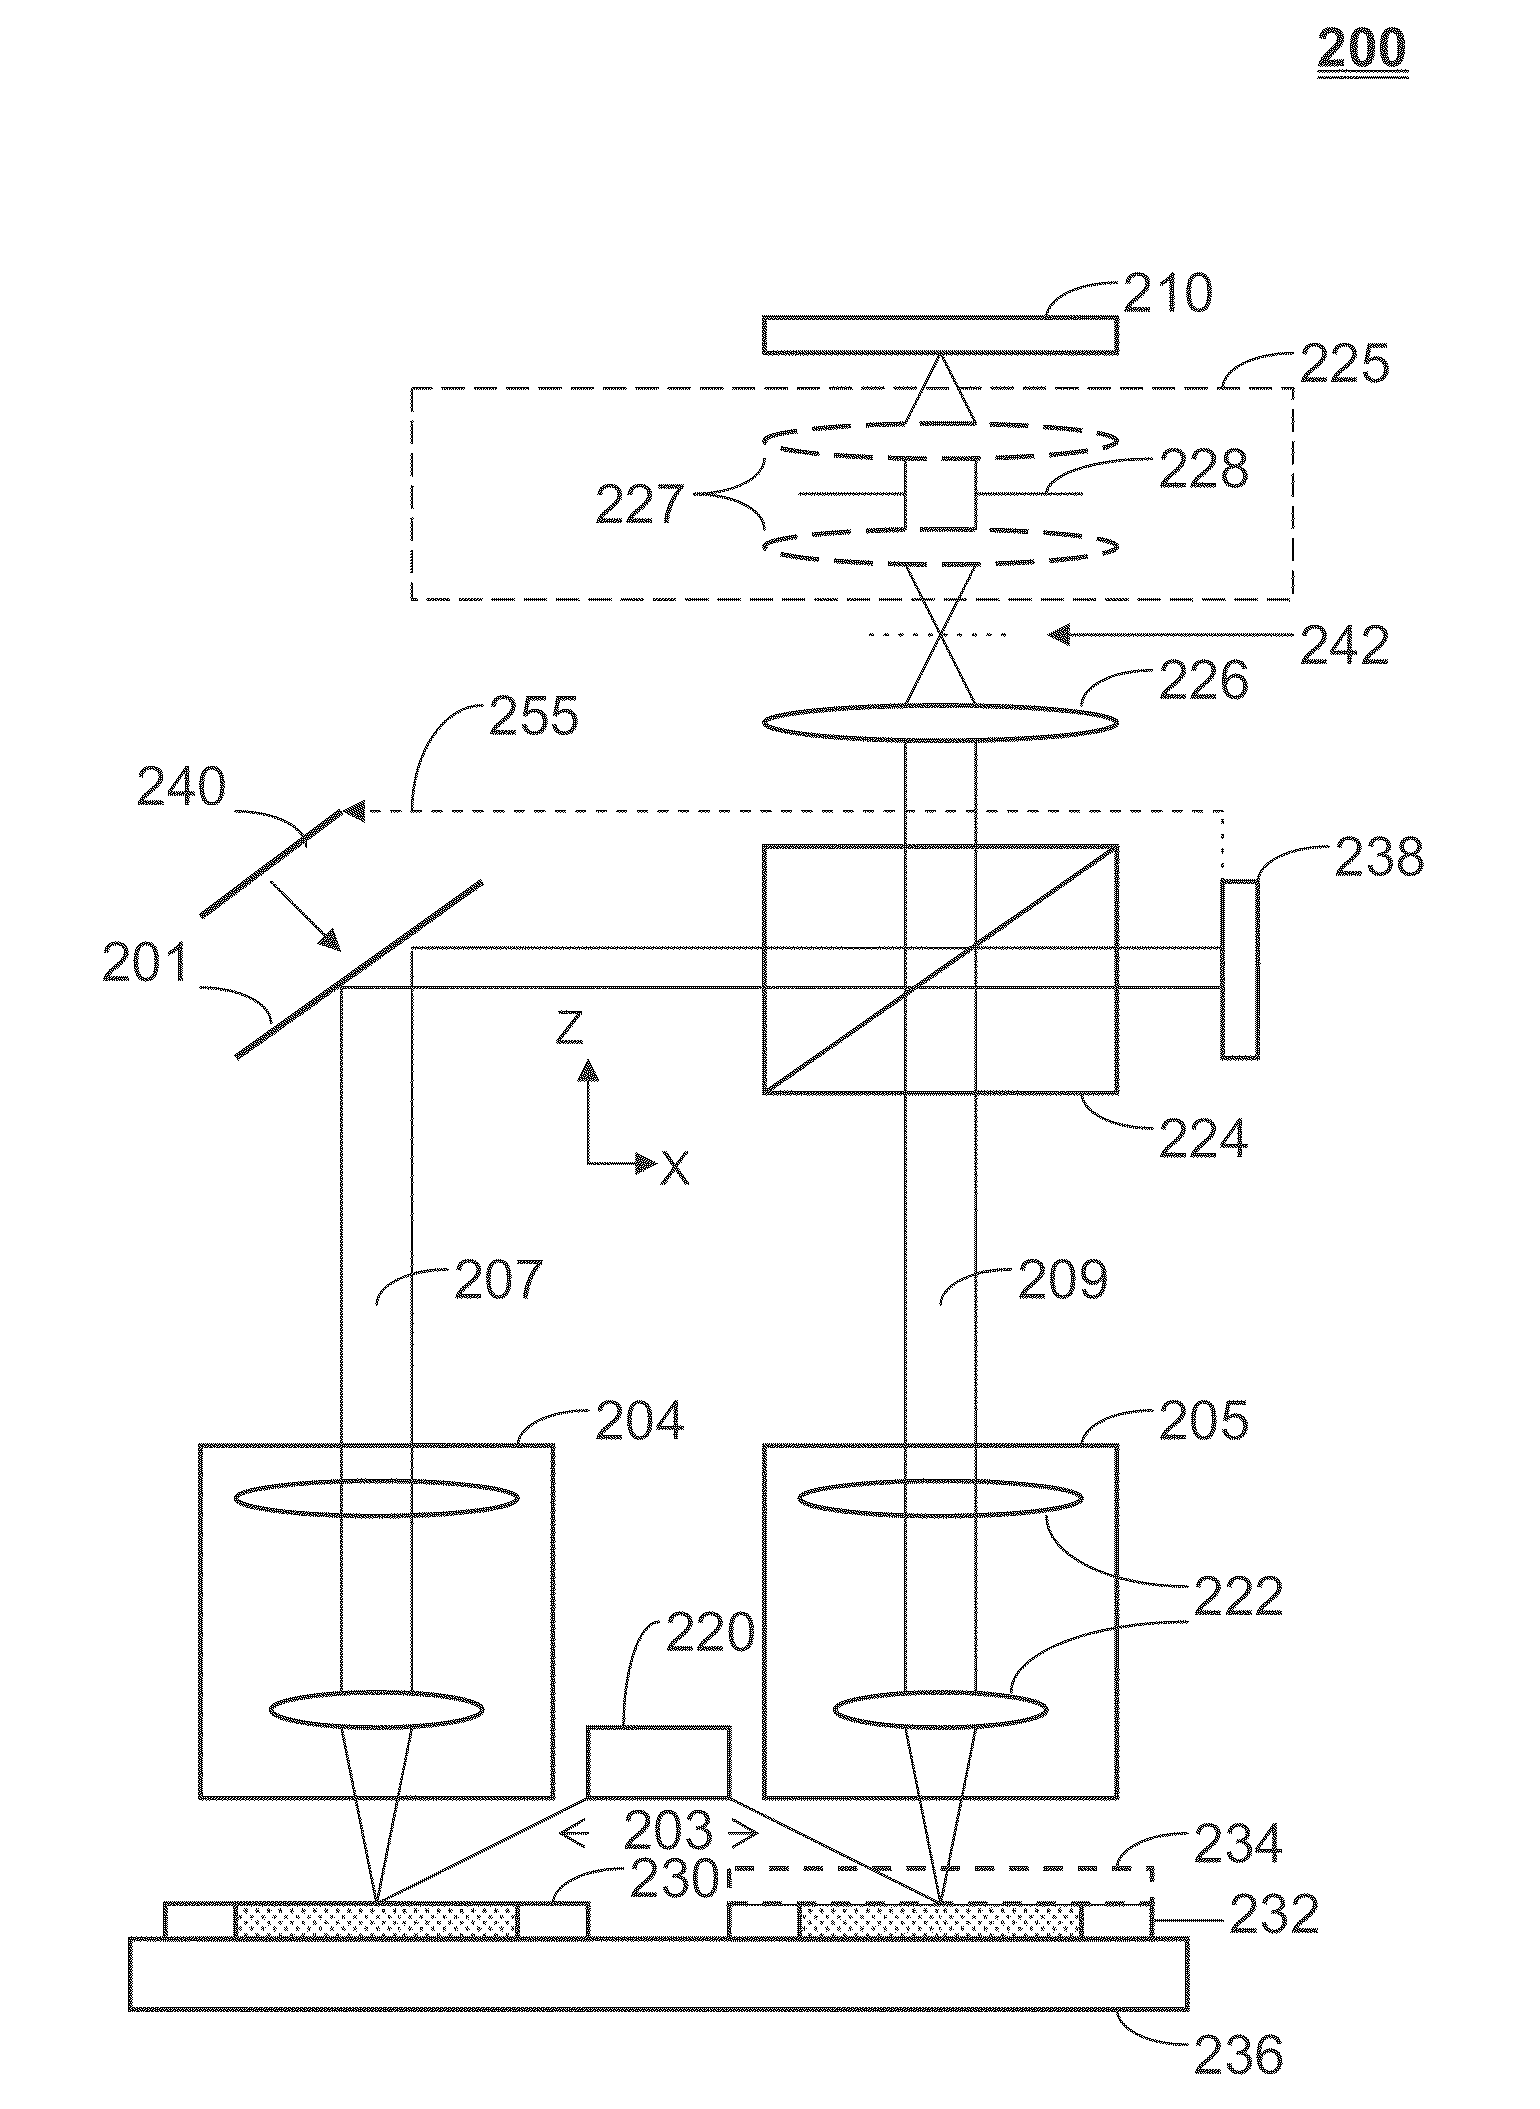 Reticle Inspection Systems and Method